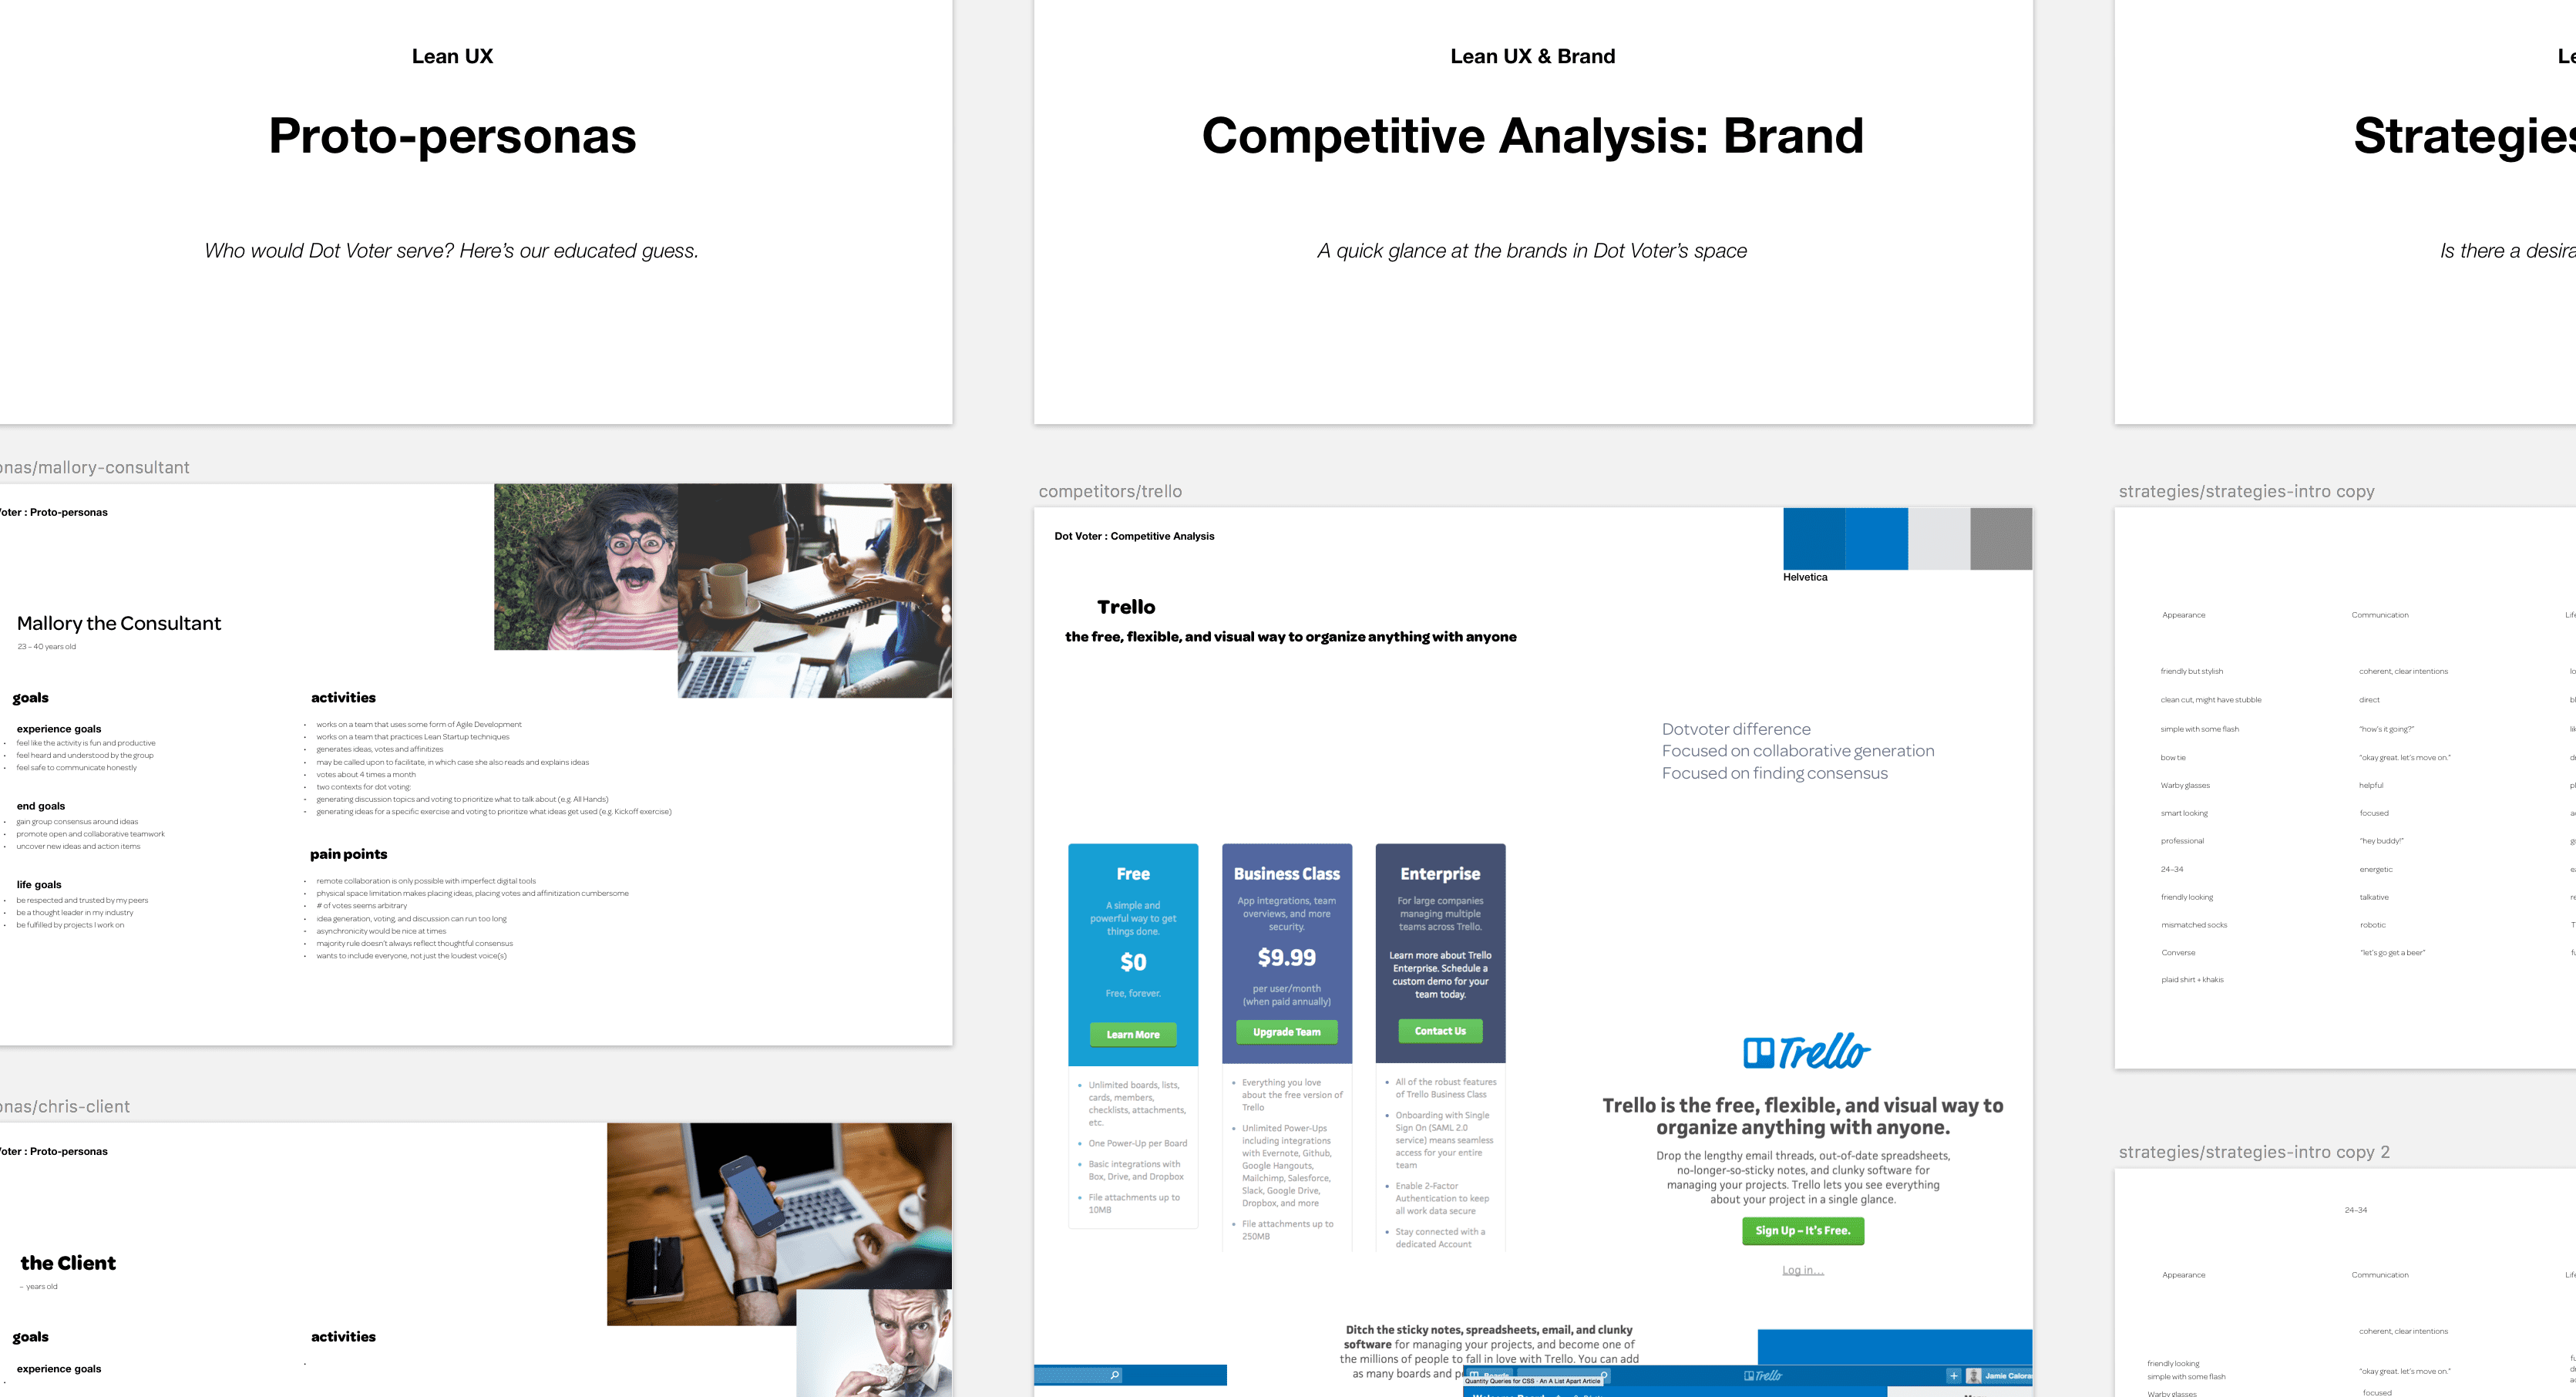 Personas and competitive analysis